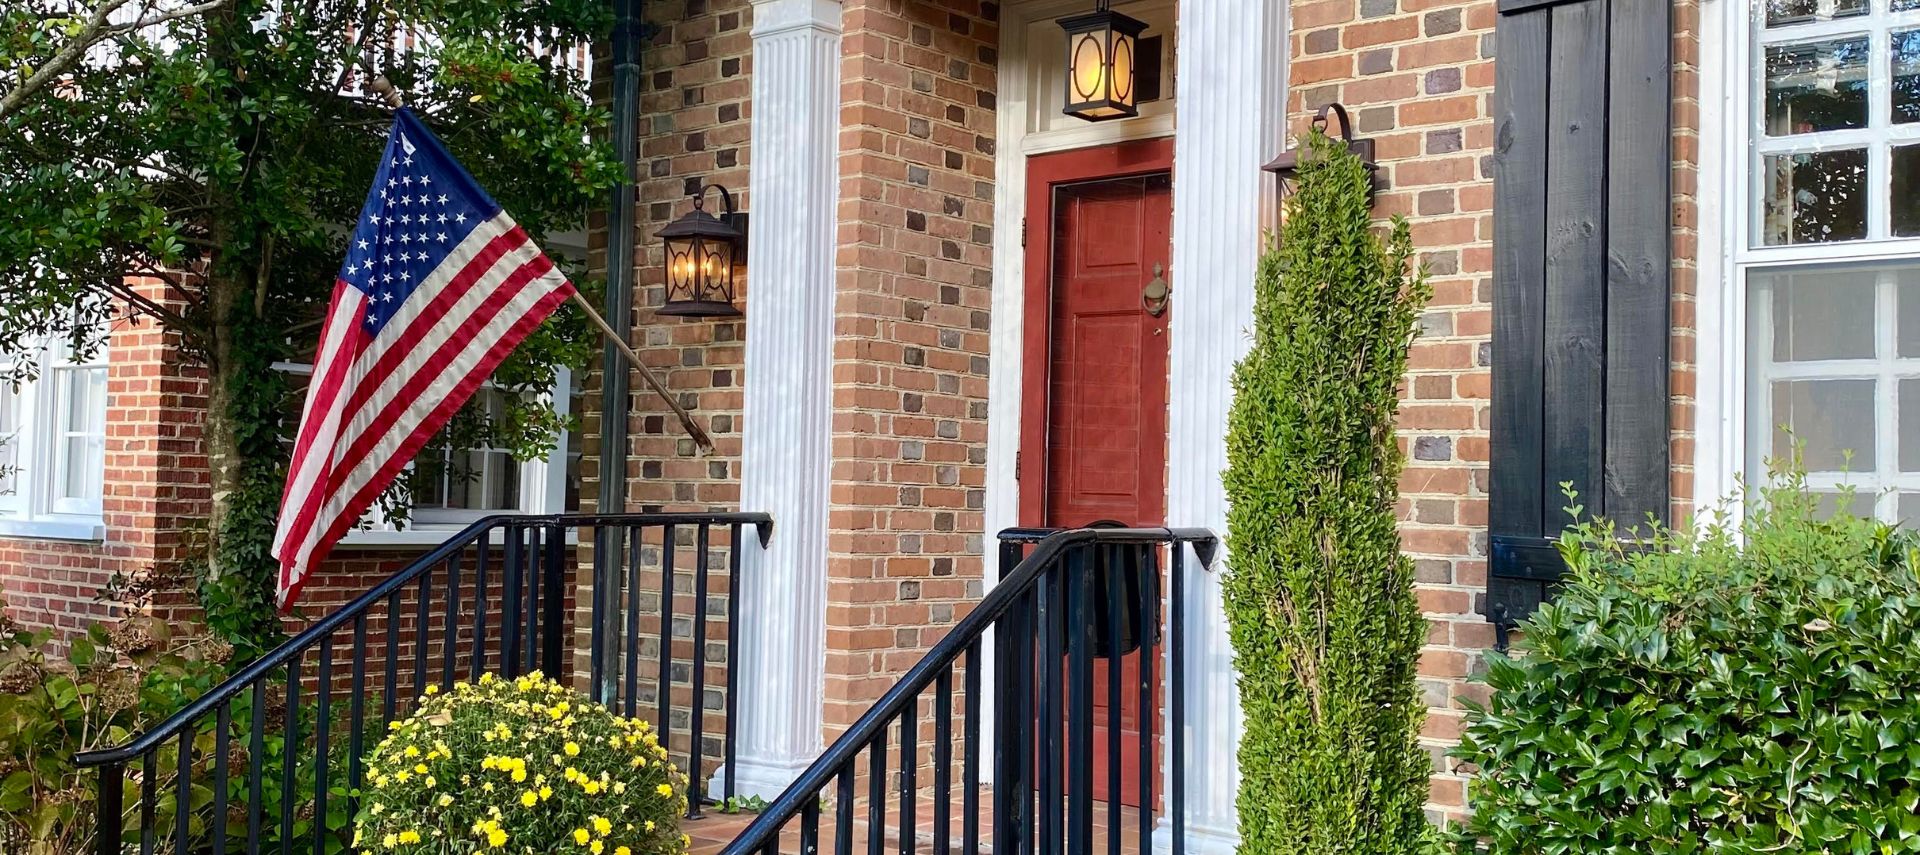 Exterior of a brick home with a red front door, black railing and shutters and an American flag on a pole